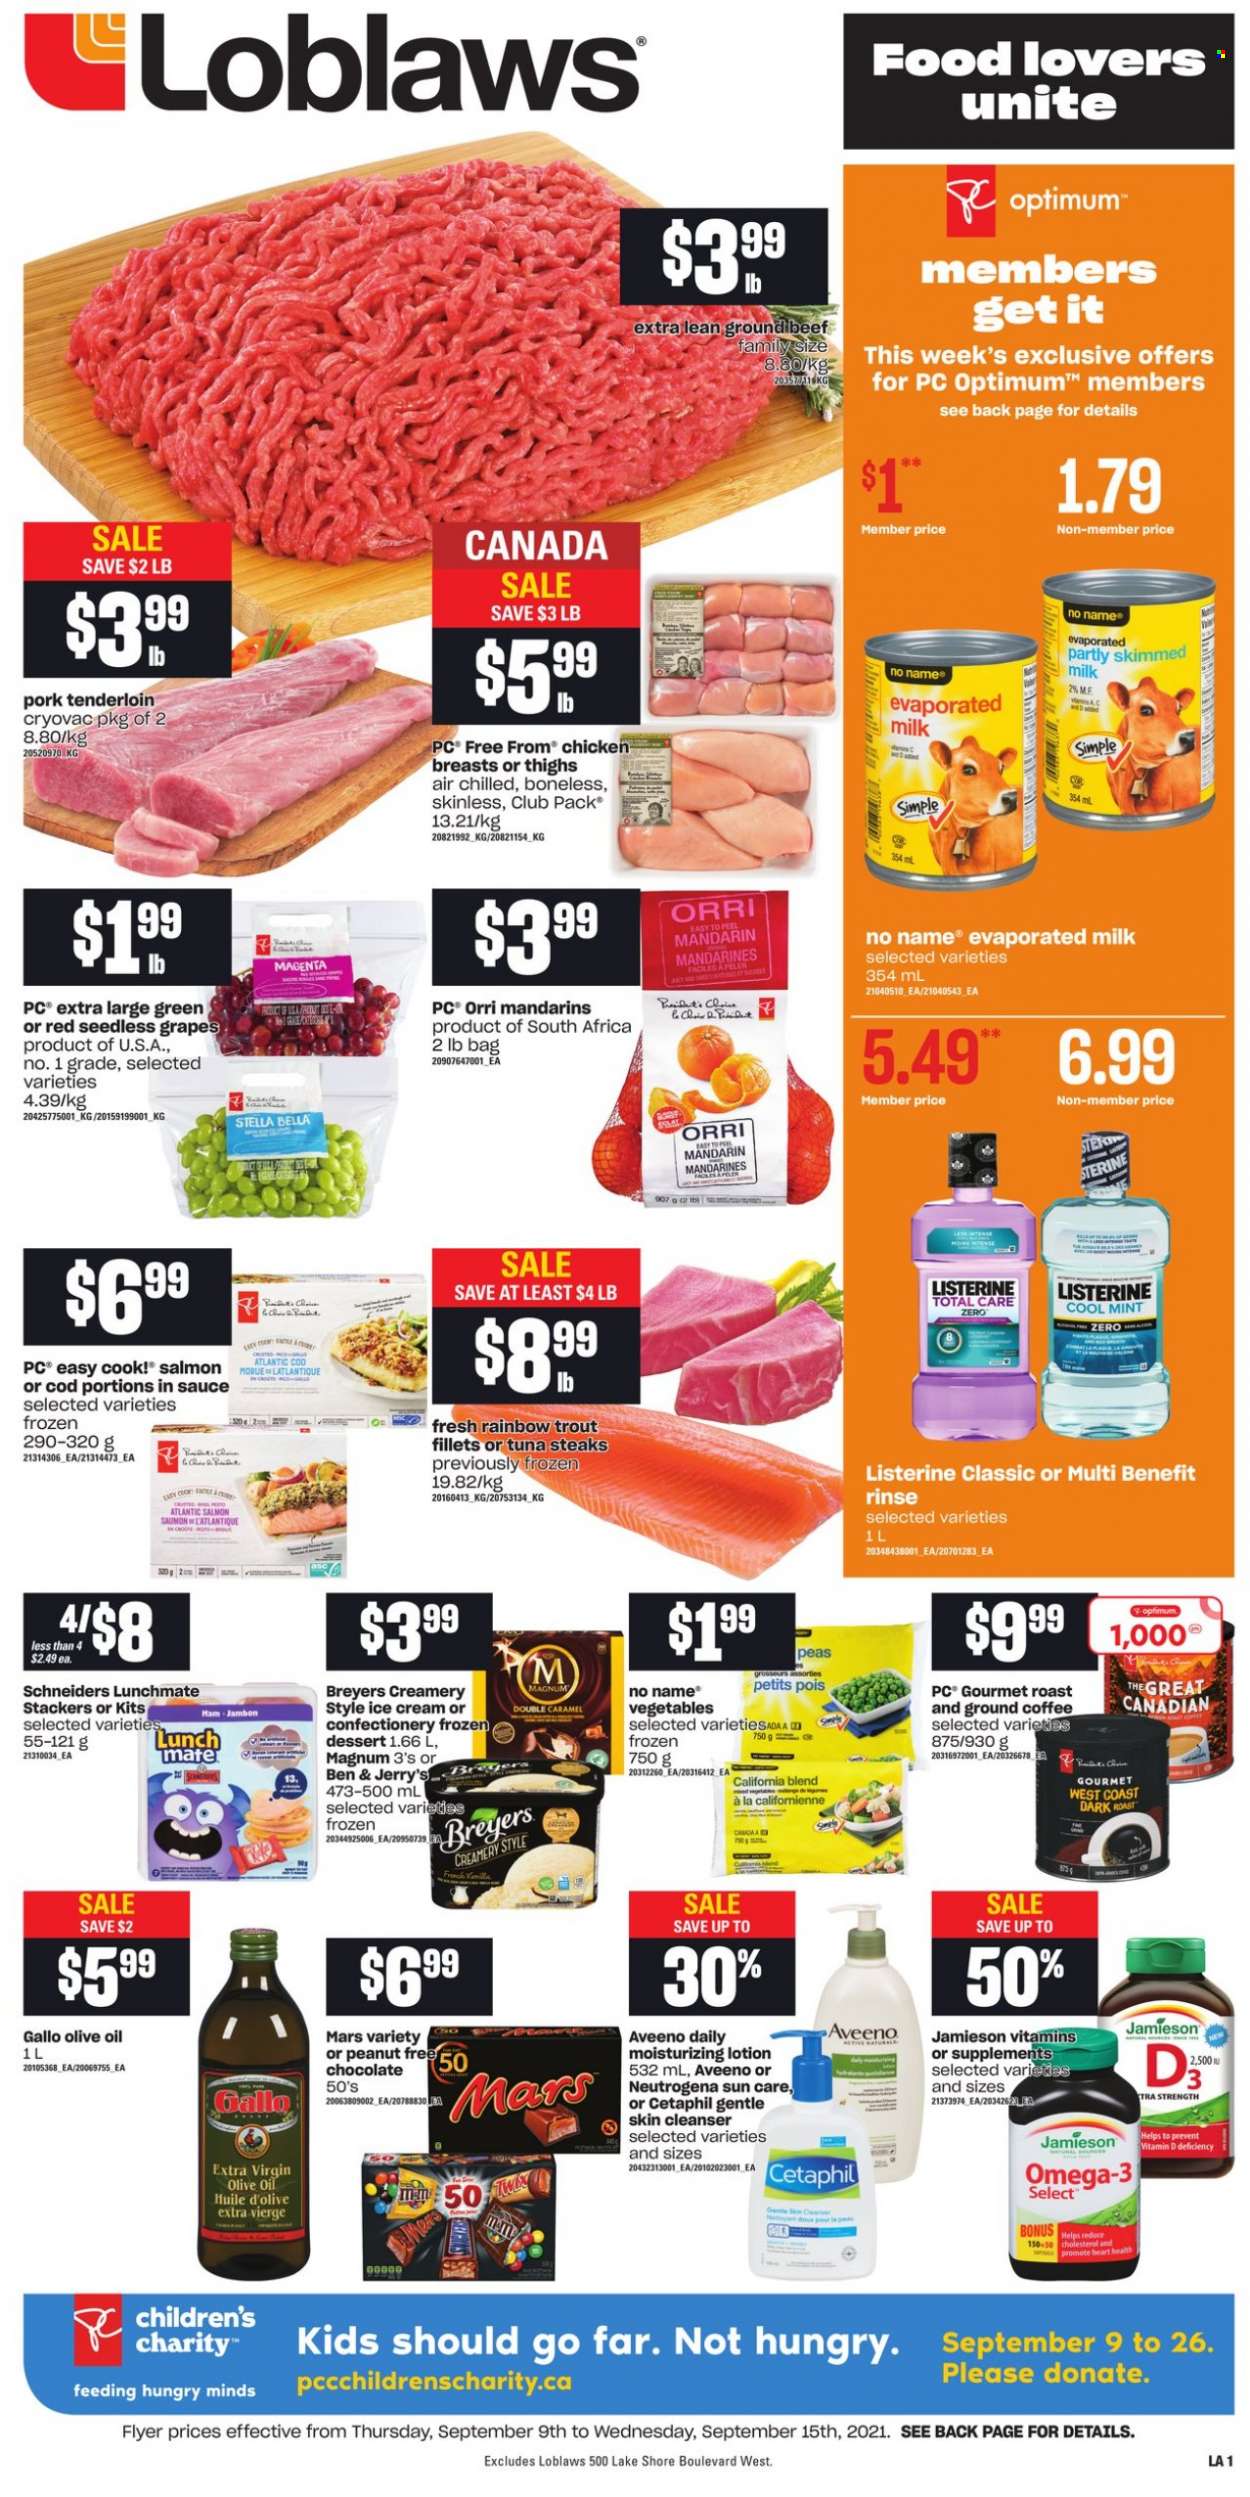 thumbnail - Loblaws Flyer - September 09, 2021 - September 15, 2021 - Sales products - Bella, peas, grapes, mandarines, seedless grapes, cod, salmon, trout, tuna, No Name, ham, evaporated milk, ice cream, Ben & Jerry's, Mars, extra virgin olive oil, olive oil, oil, coffee, ground coffee, chicken breasts, pork meat, pork tenderloin, Aveeno, cleanser, body lotion, Optimum, Omega-3, Listerine, Neutrogena, steak. Page 1.